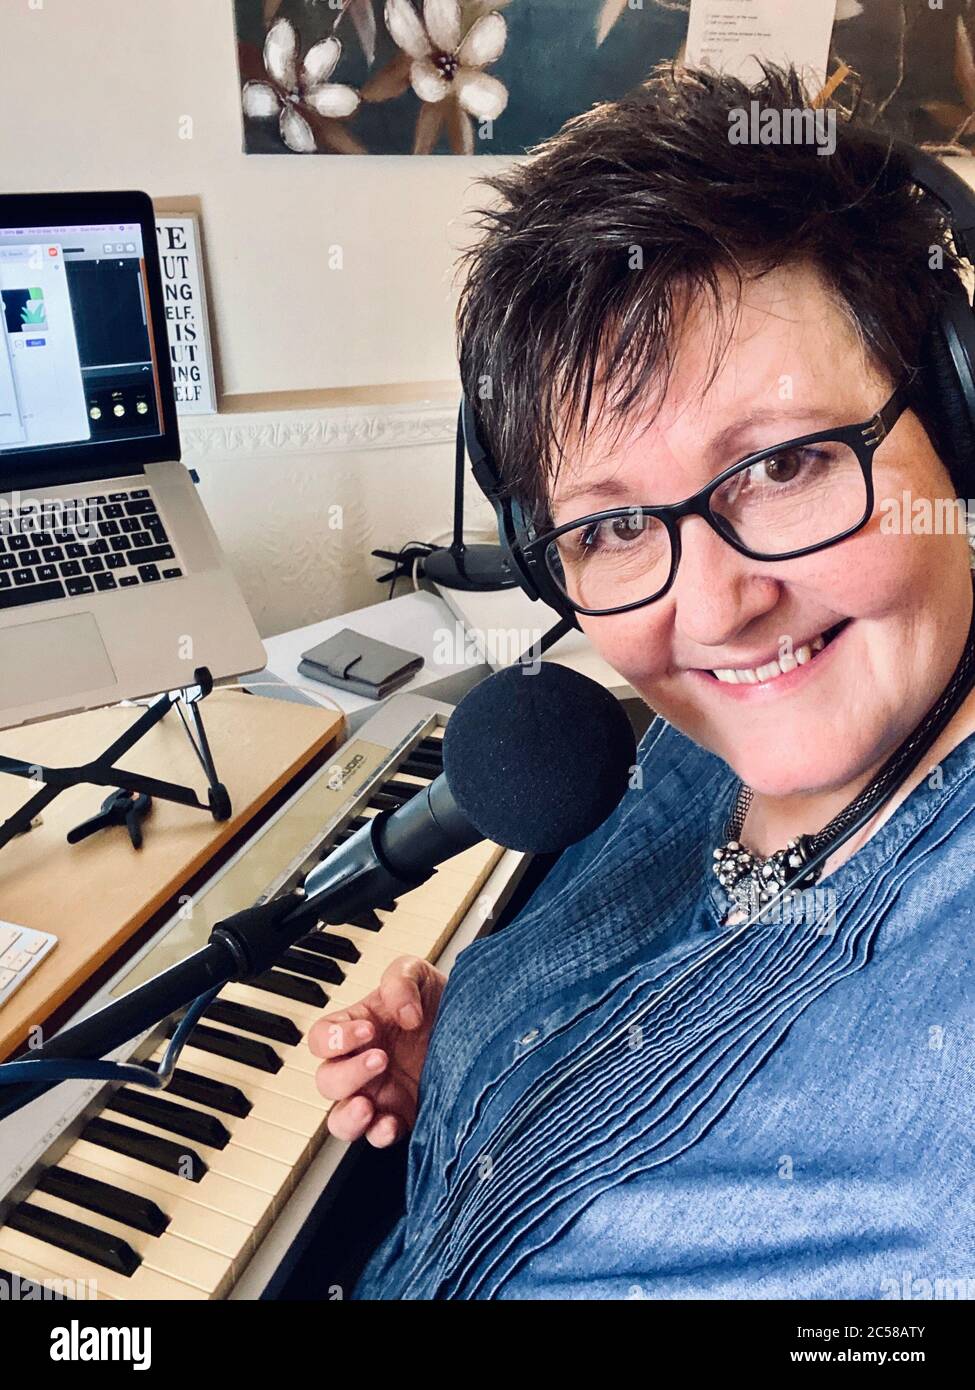 Mature female with black short hair & glasses smiling behind microphone, musical keyboard and computer whilst teaching online through livestreaming Stock Photo